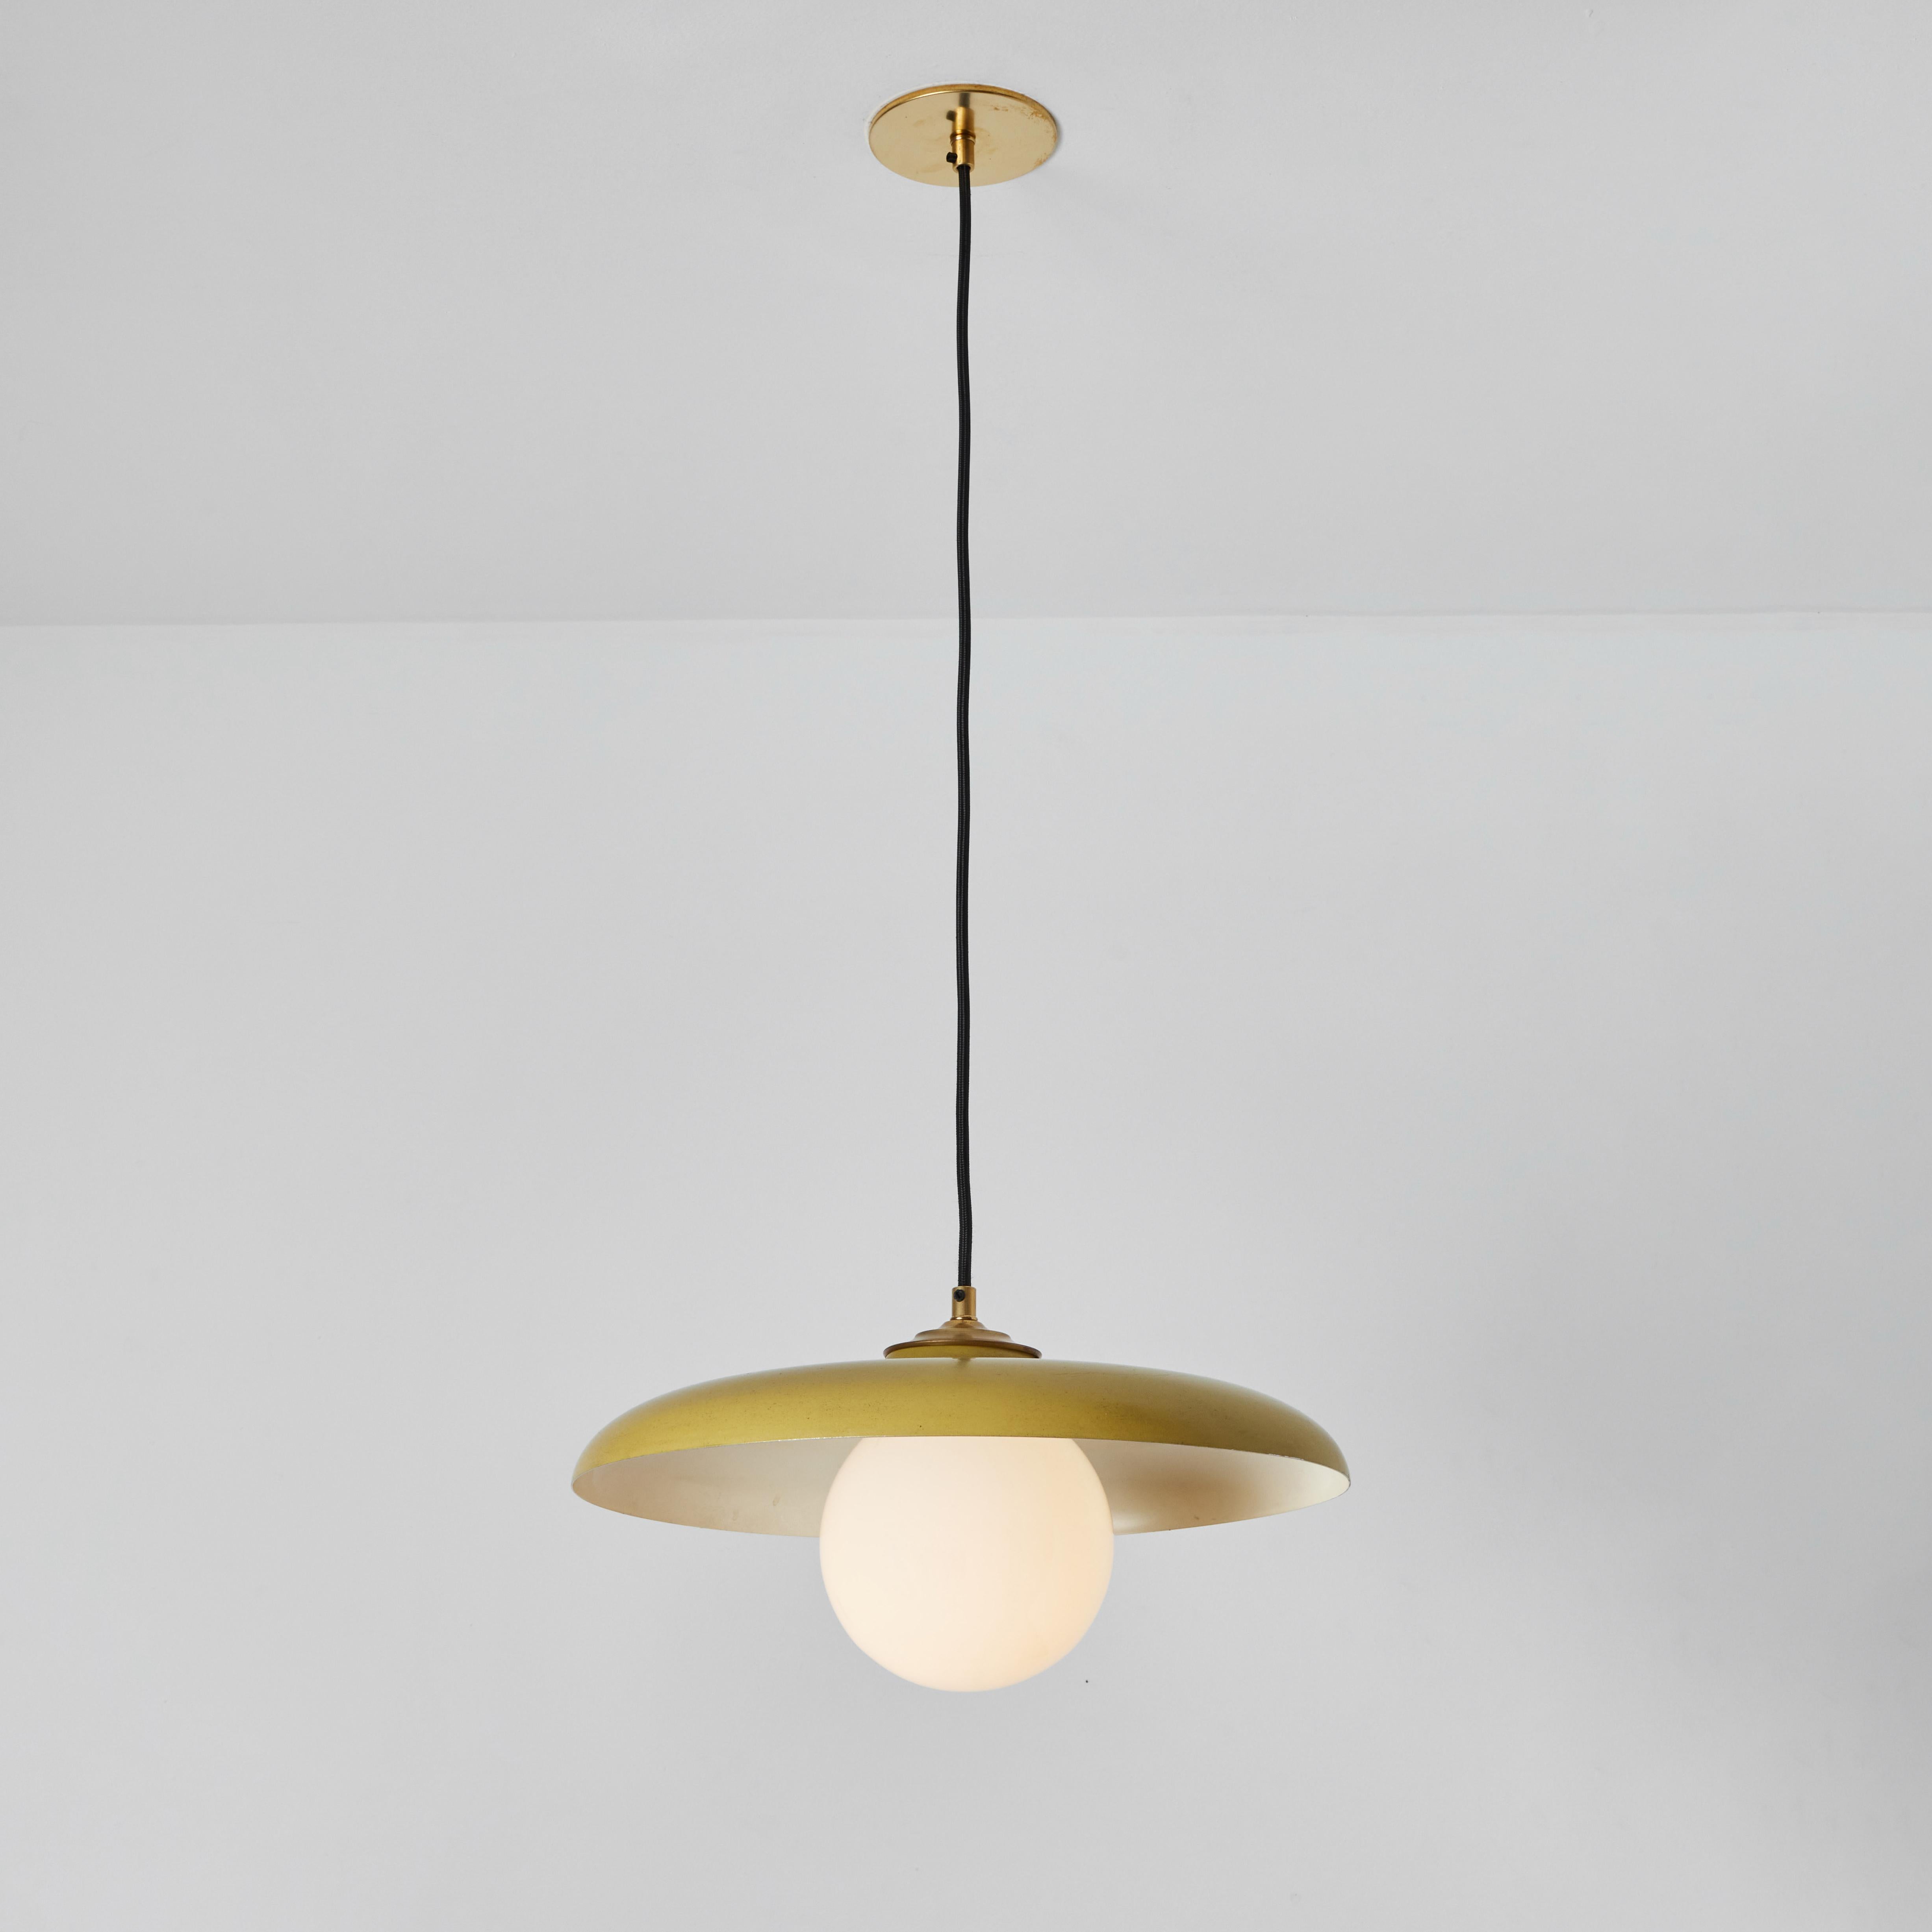 1960s Stilux Milano yellow painted metal & opaline globe glass pendant lamp. Executed in yellow painted metal, opaline glass and brass with thick cloth cord that can be cut to desired length. 

Stilux was one of the most innovative lighting design